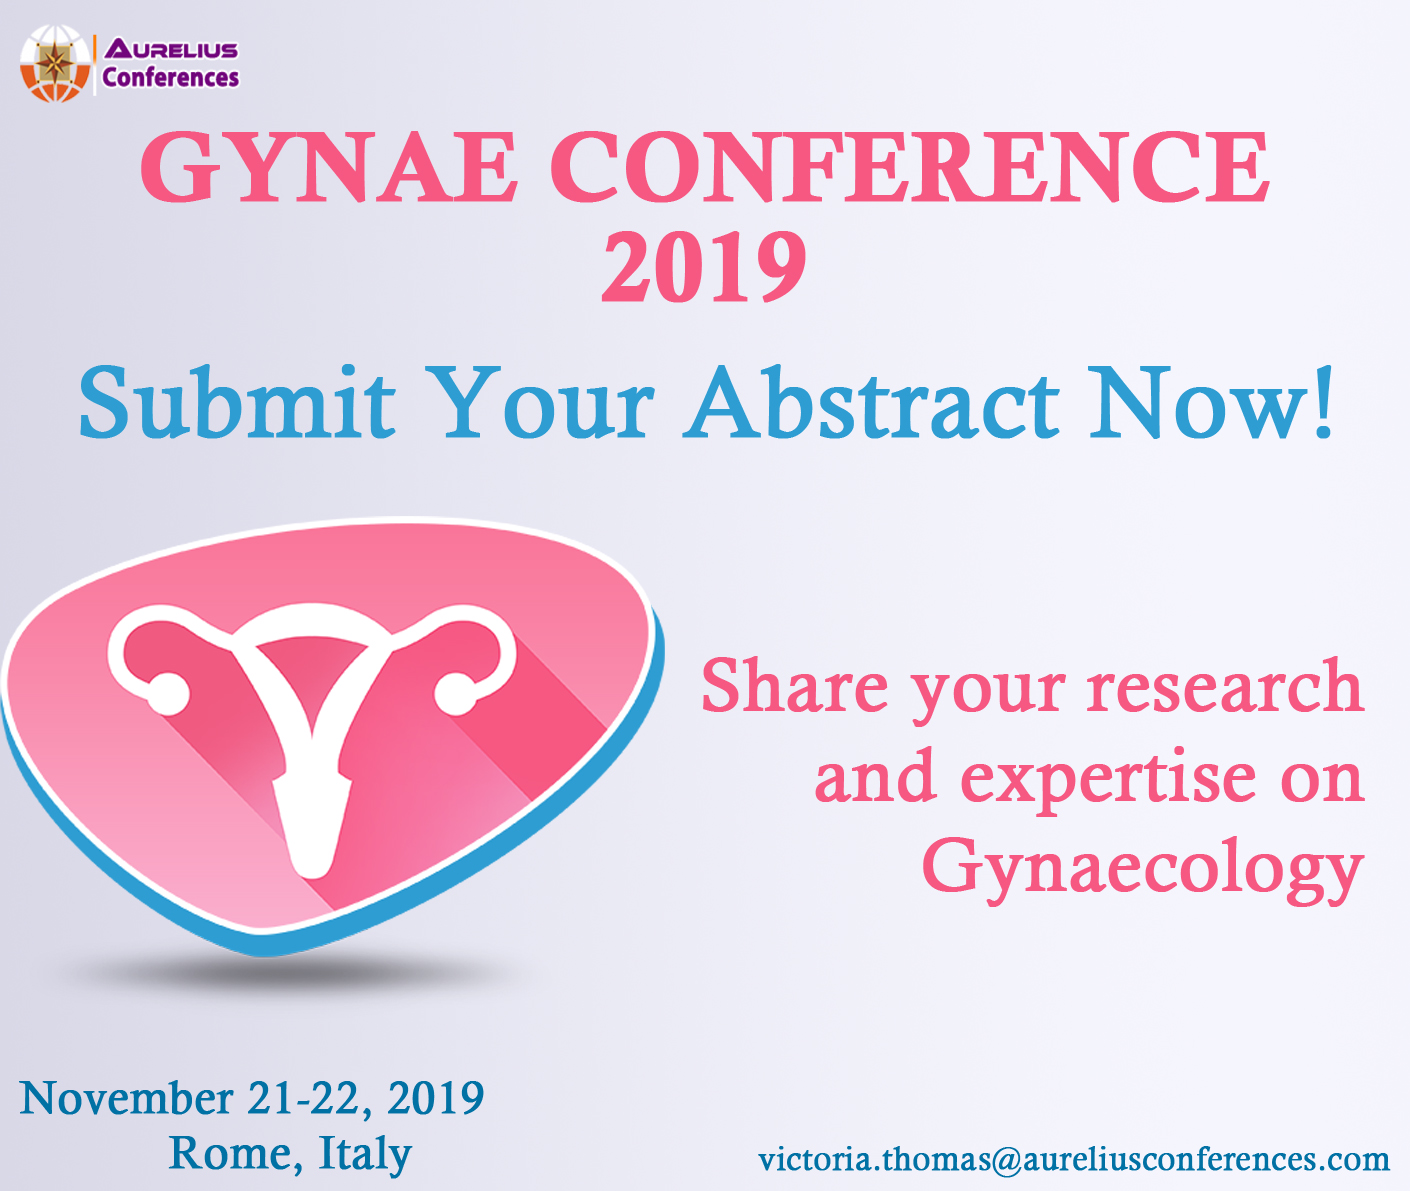 Gynae Conference 2019, Rome, Italy